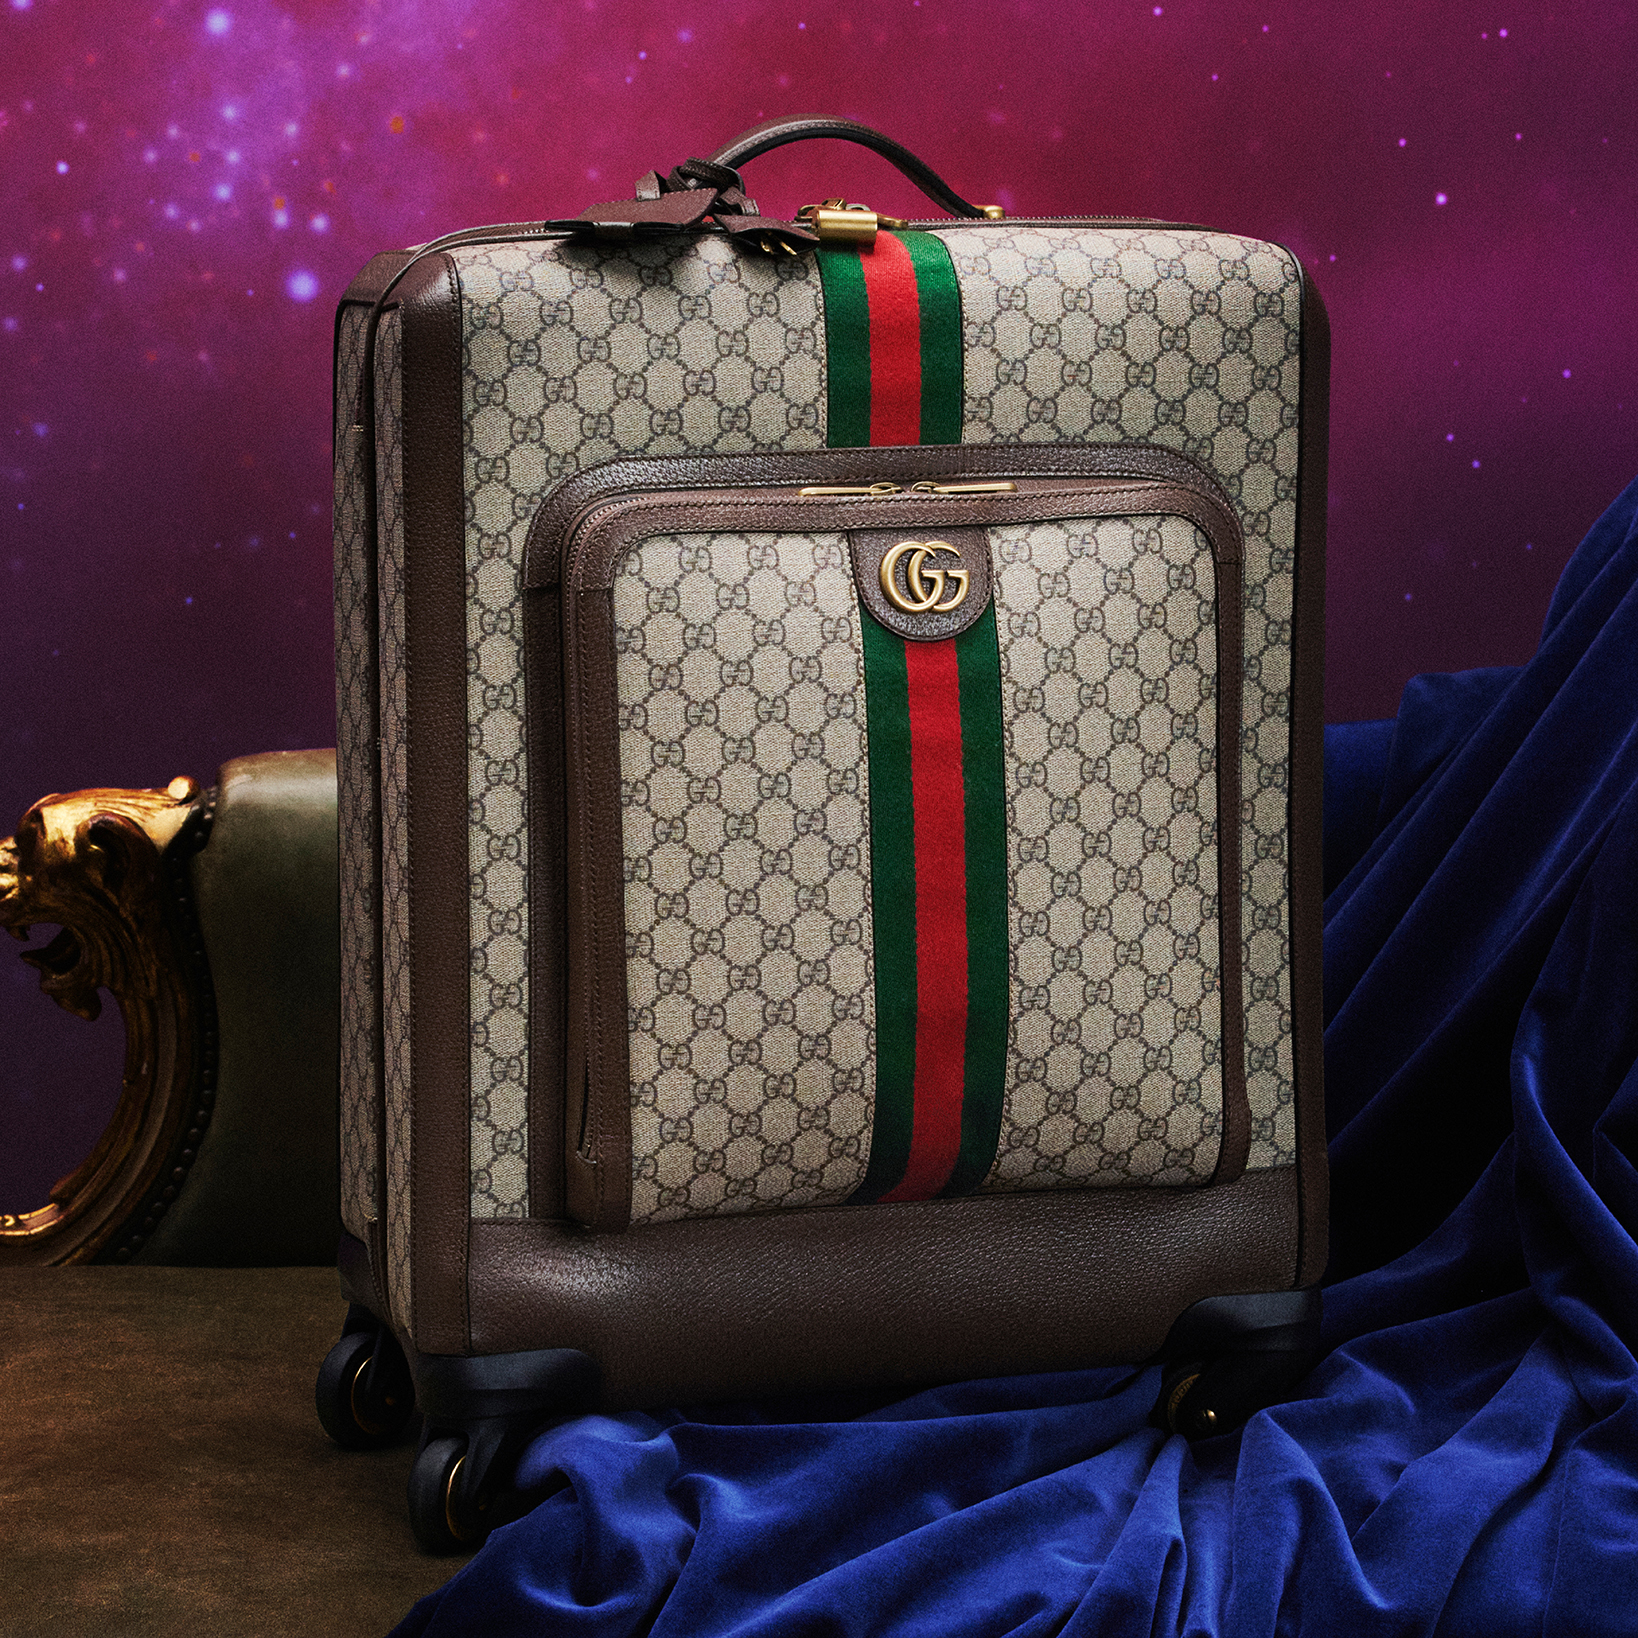 gucci on X: The Gucci Savoy trolley from the #GucciValigeria collection  infuses heritage codes in a piece envisioned for modern travel. Discover  more  #GucciCruise23  / X